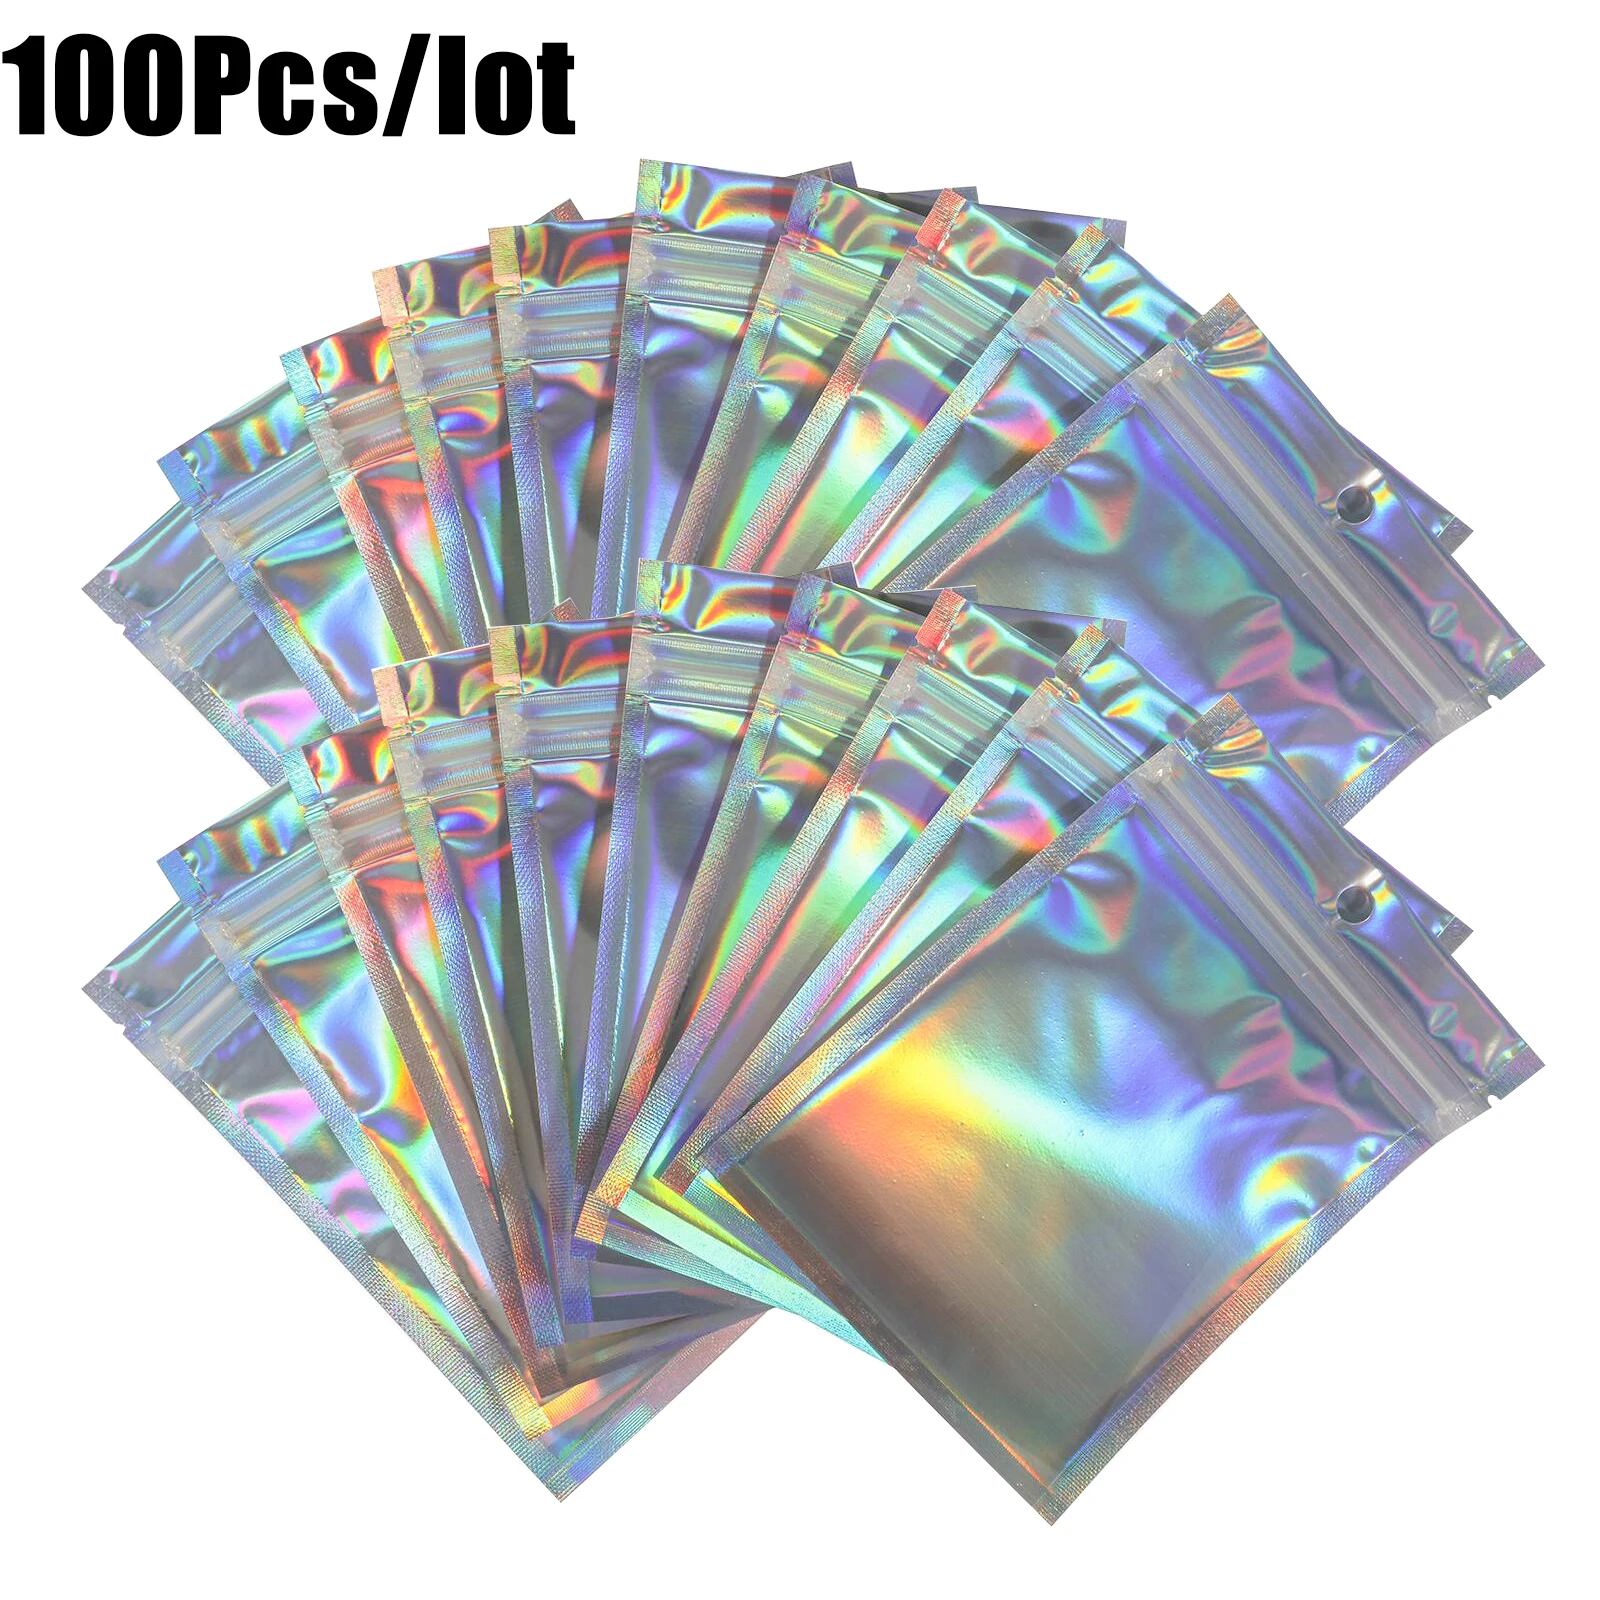 100Pcs Iridescent Zip lock Bags Pouches Cosmetic Plastic Laser Iridescent Bags Holographic Makeup Bags Hologram Zipper Bags iridescent heart